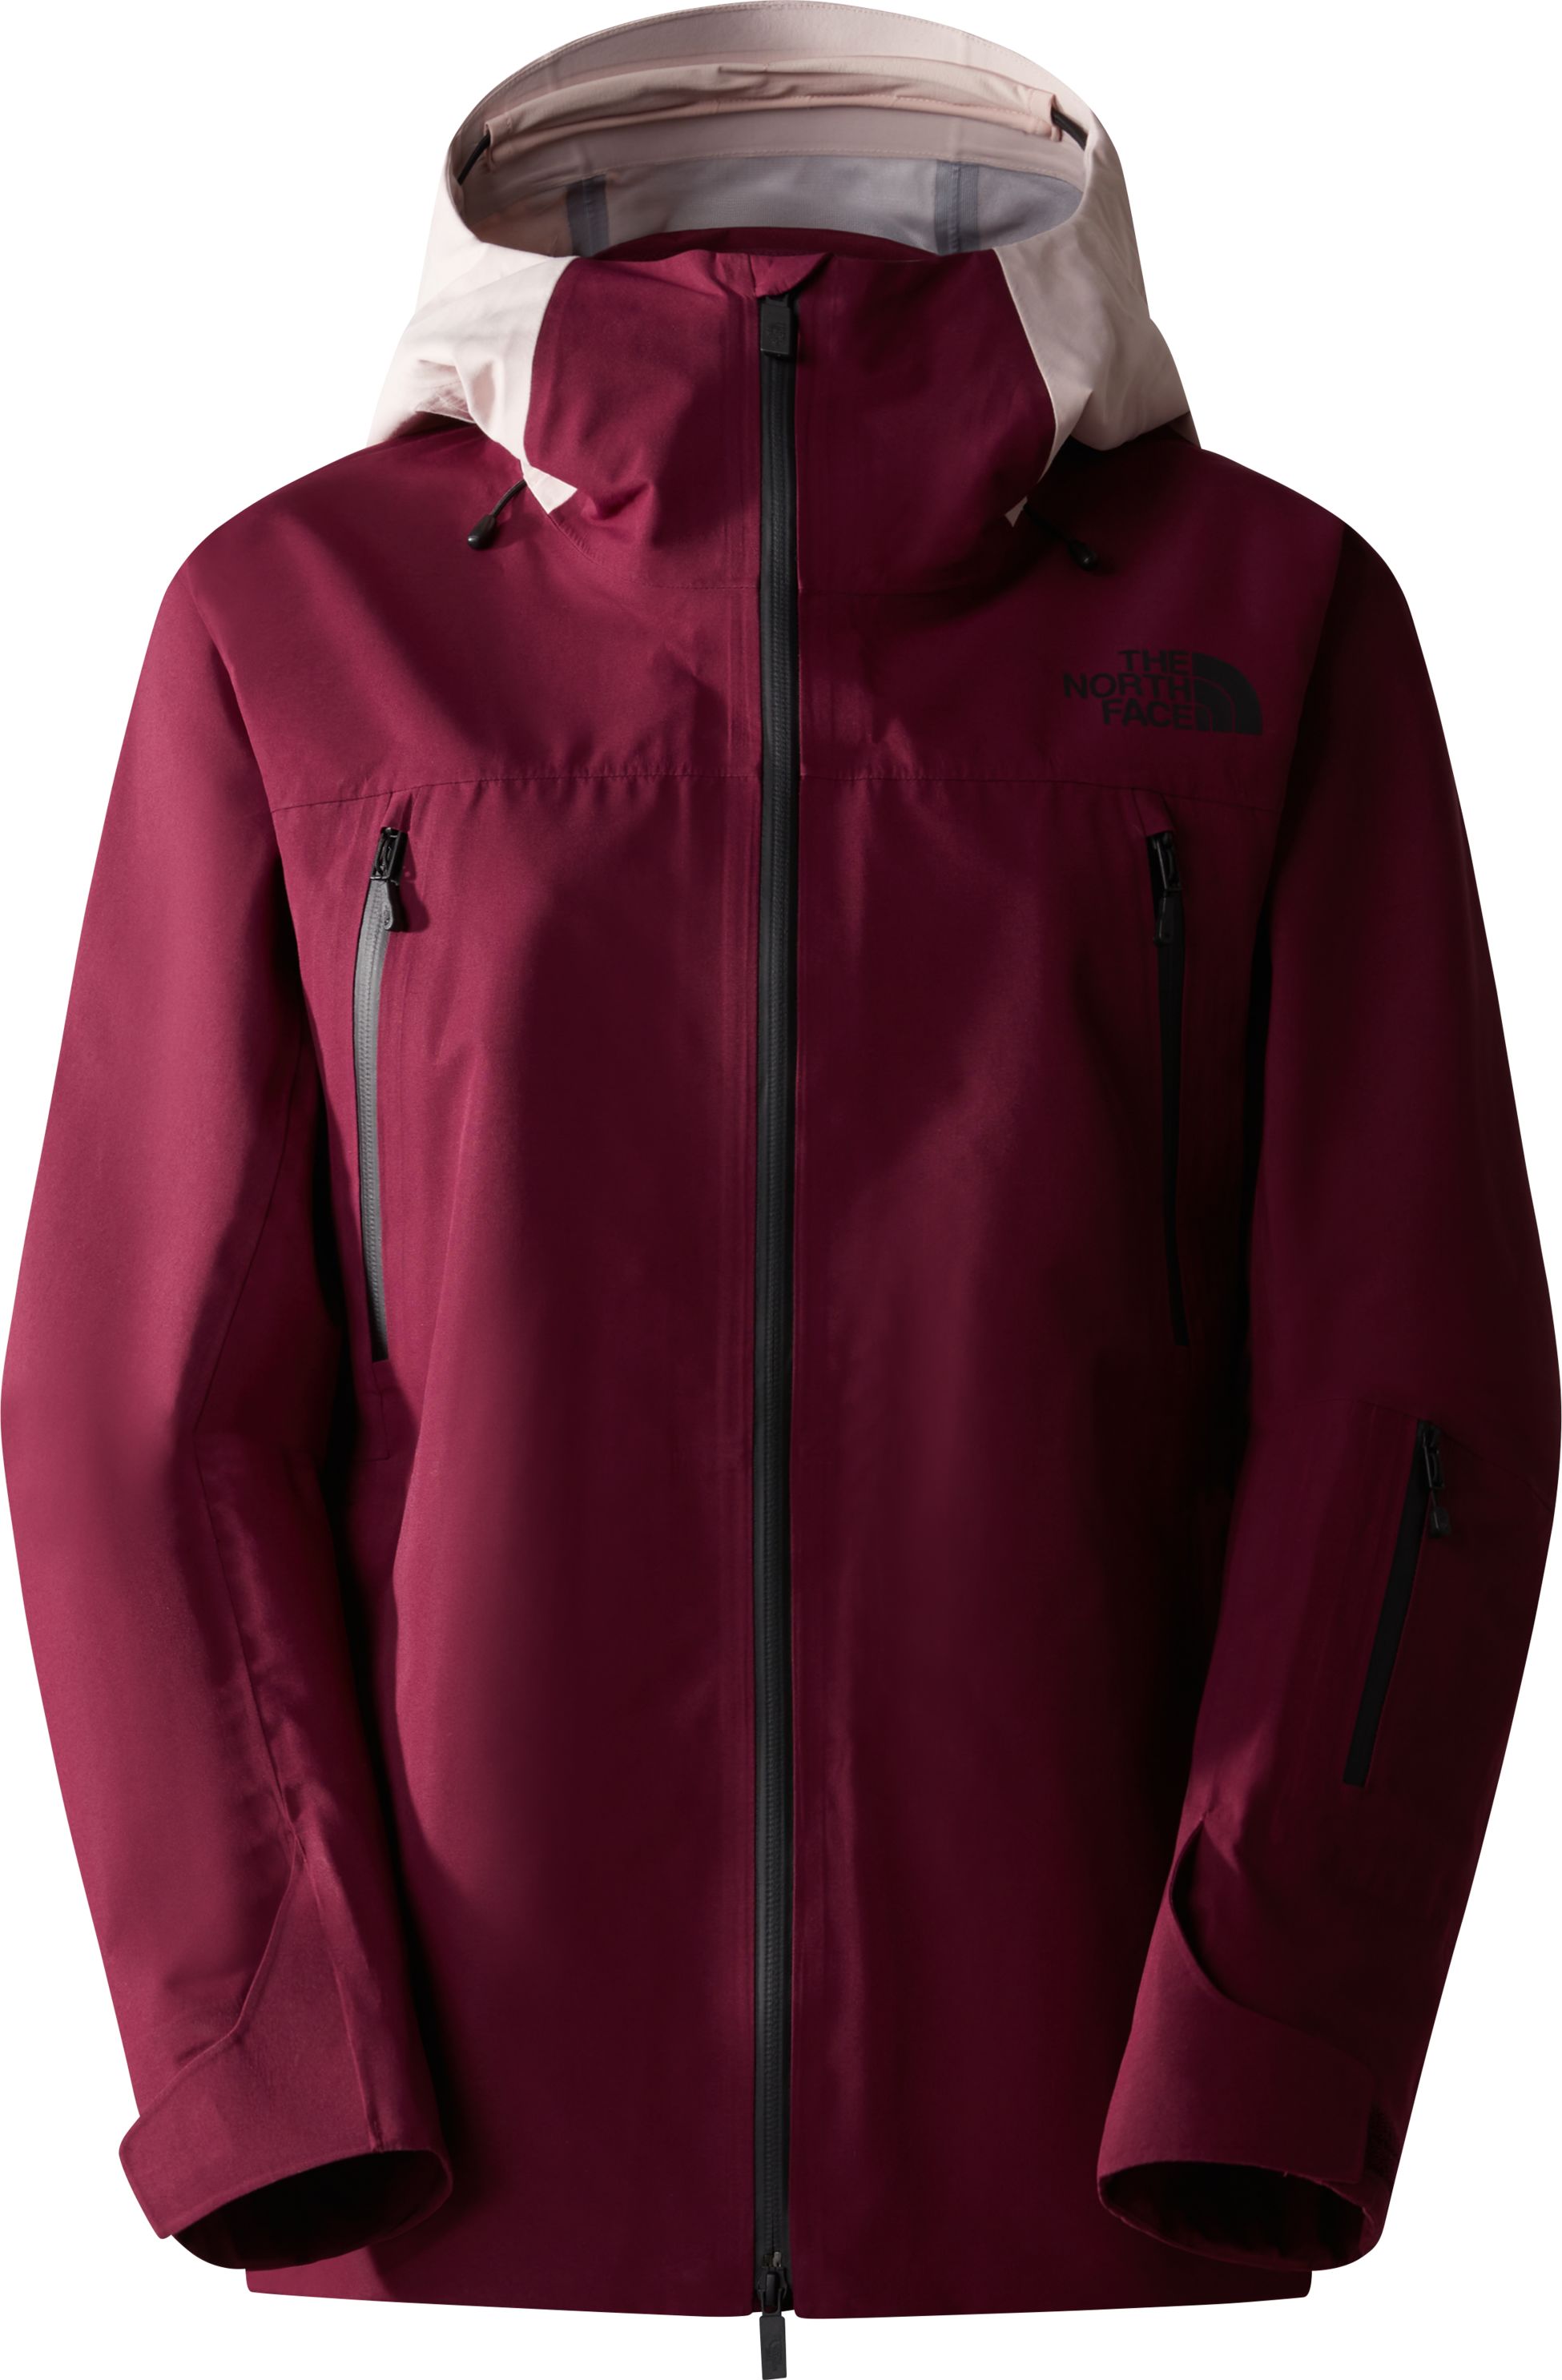 THE NORTH FACE, W CEPTOR JACKET